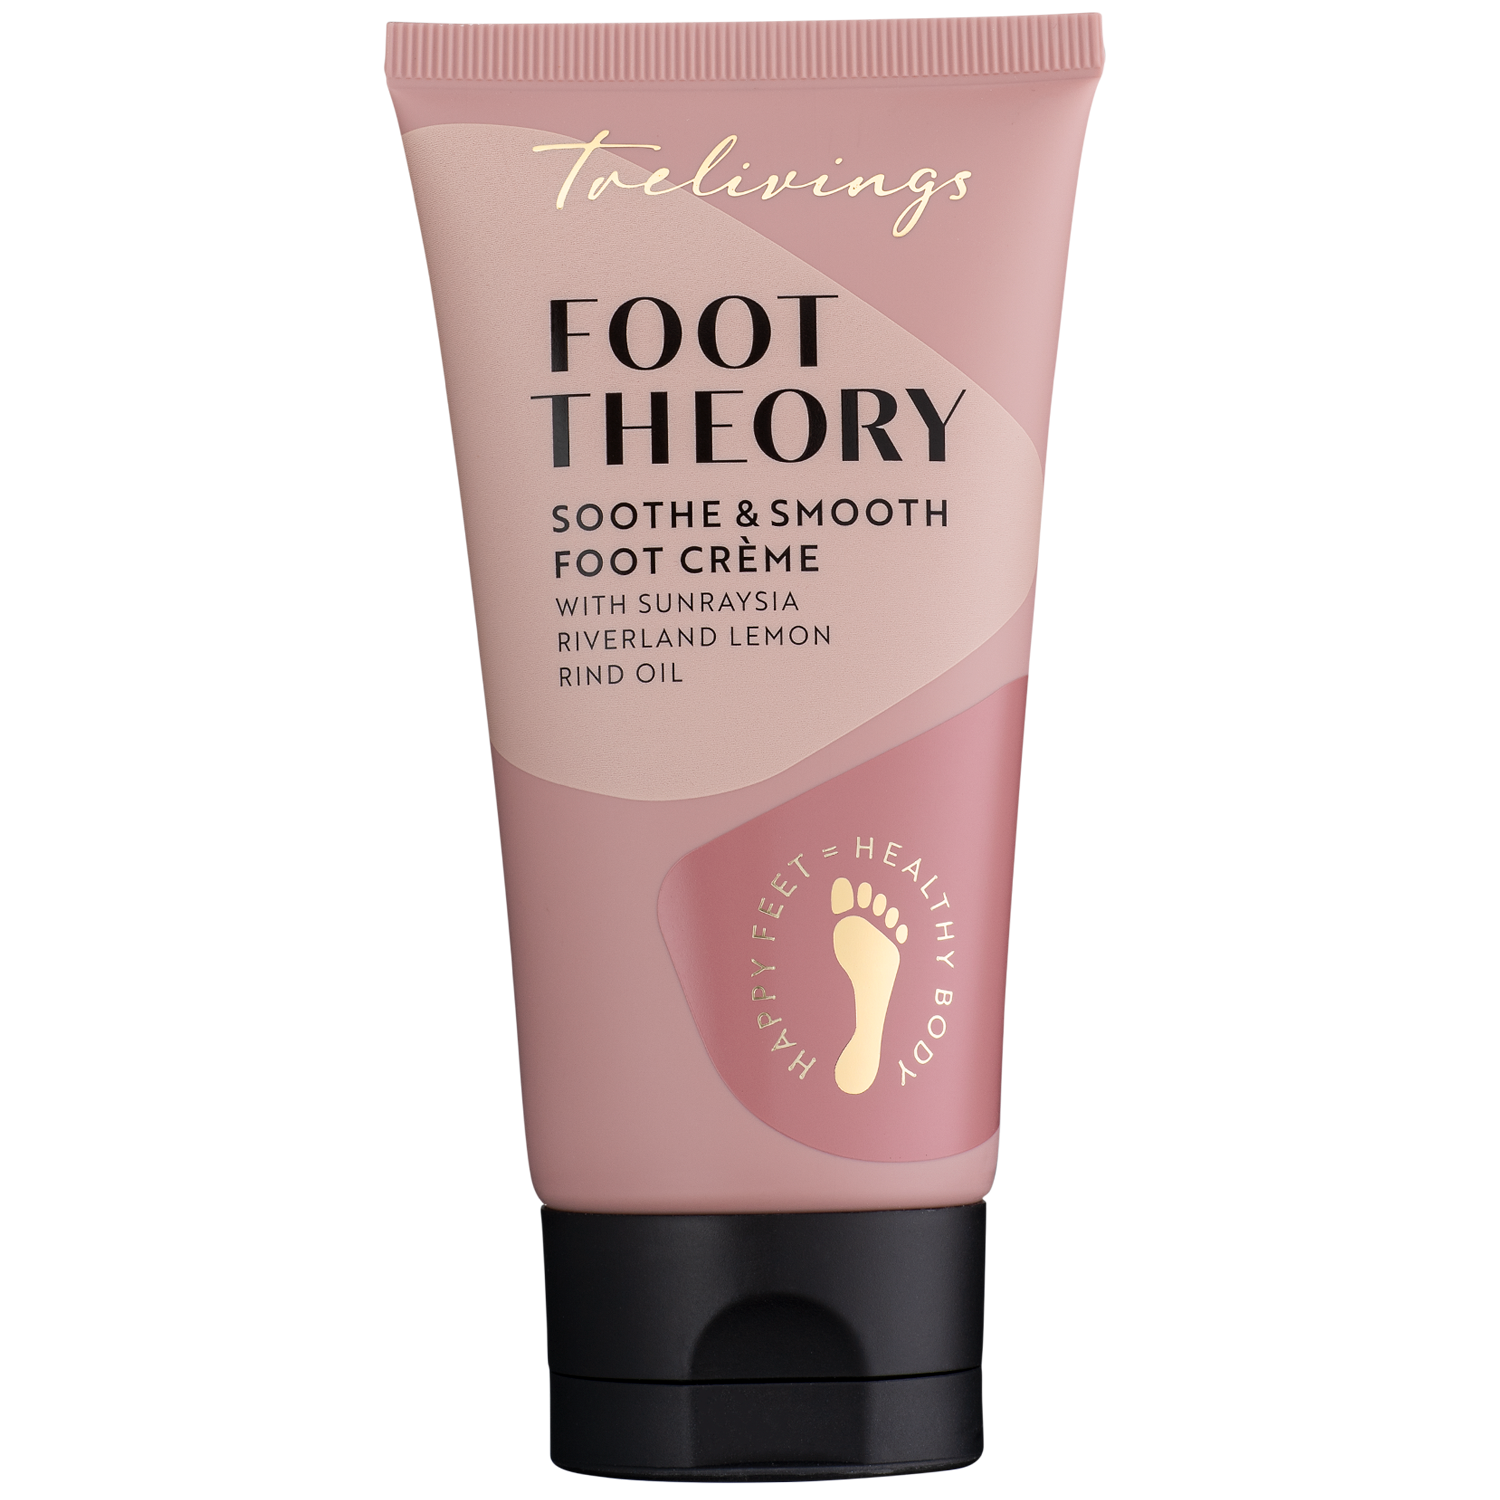 Soothe & Smooth Foot Crème 100ml